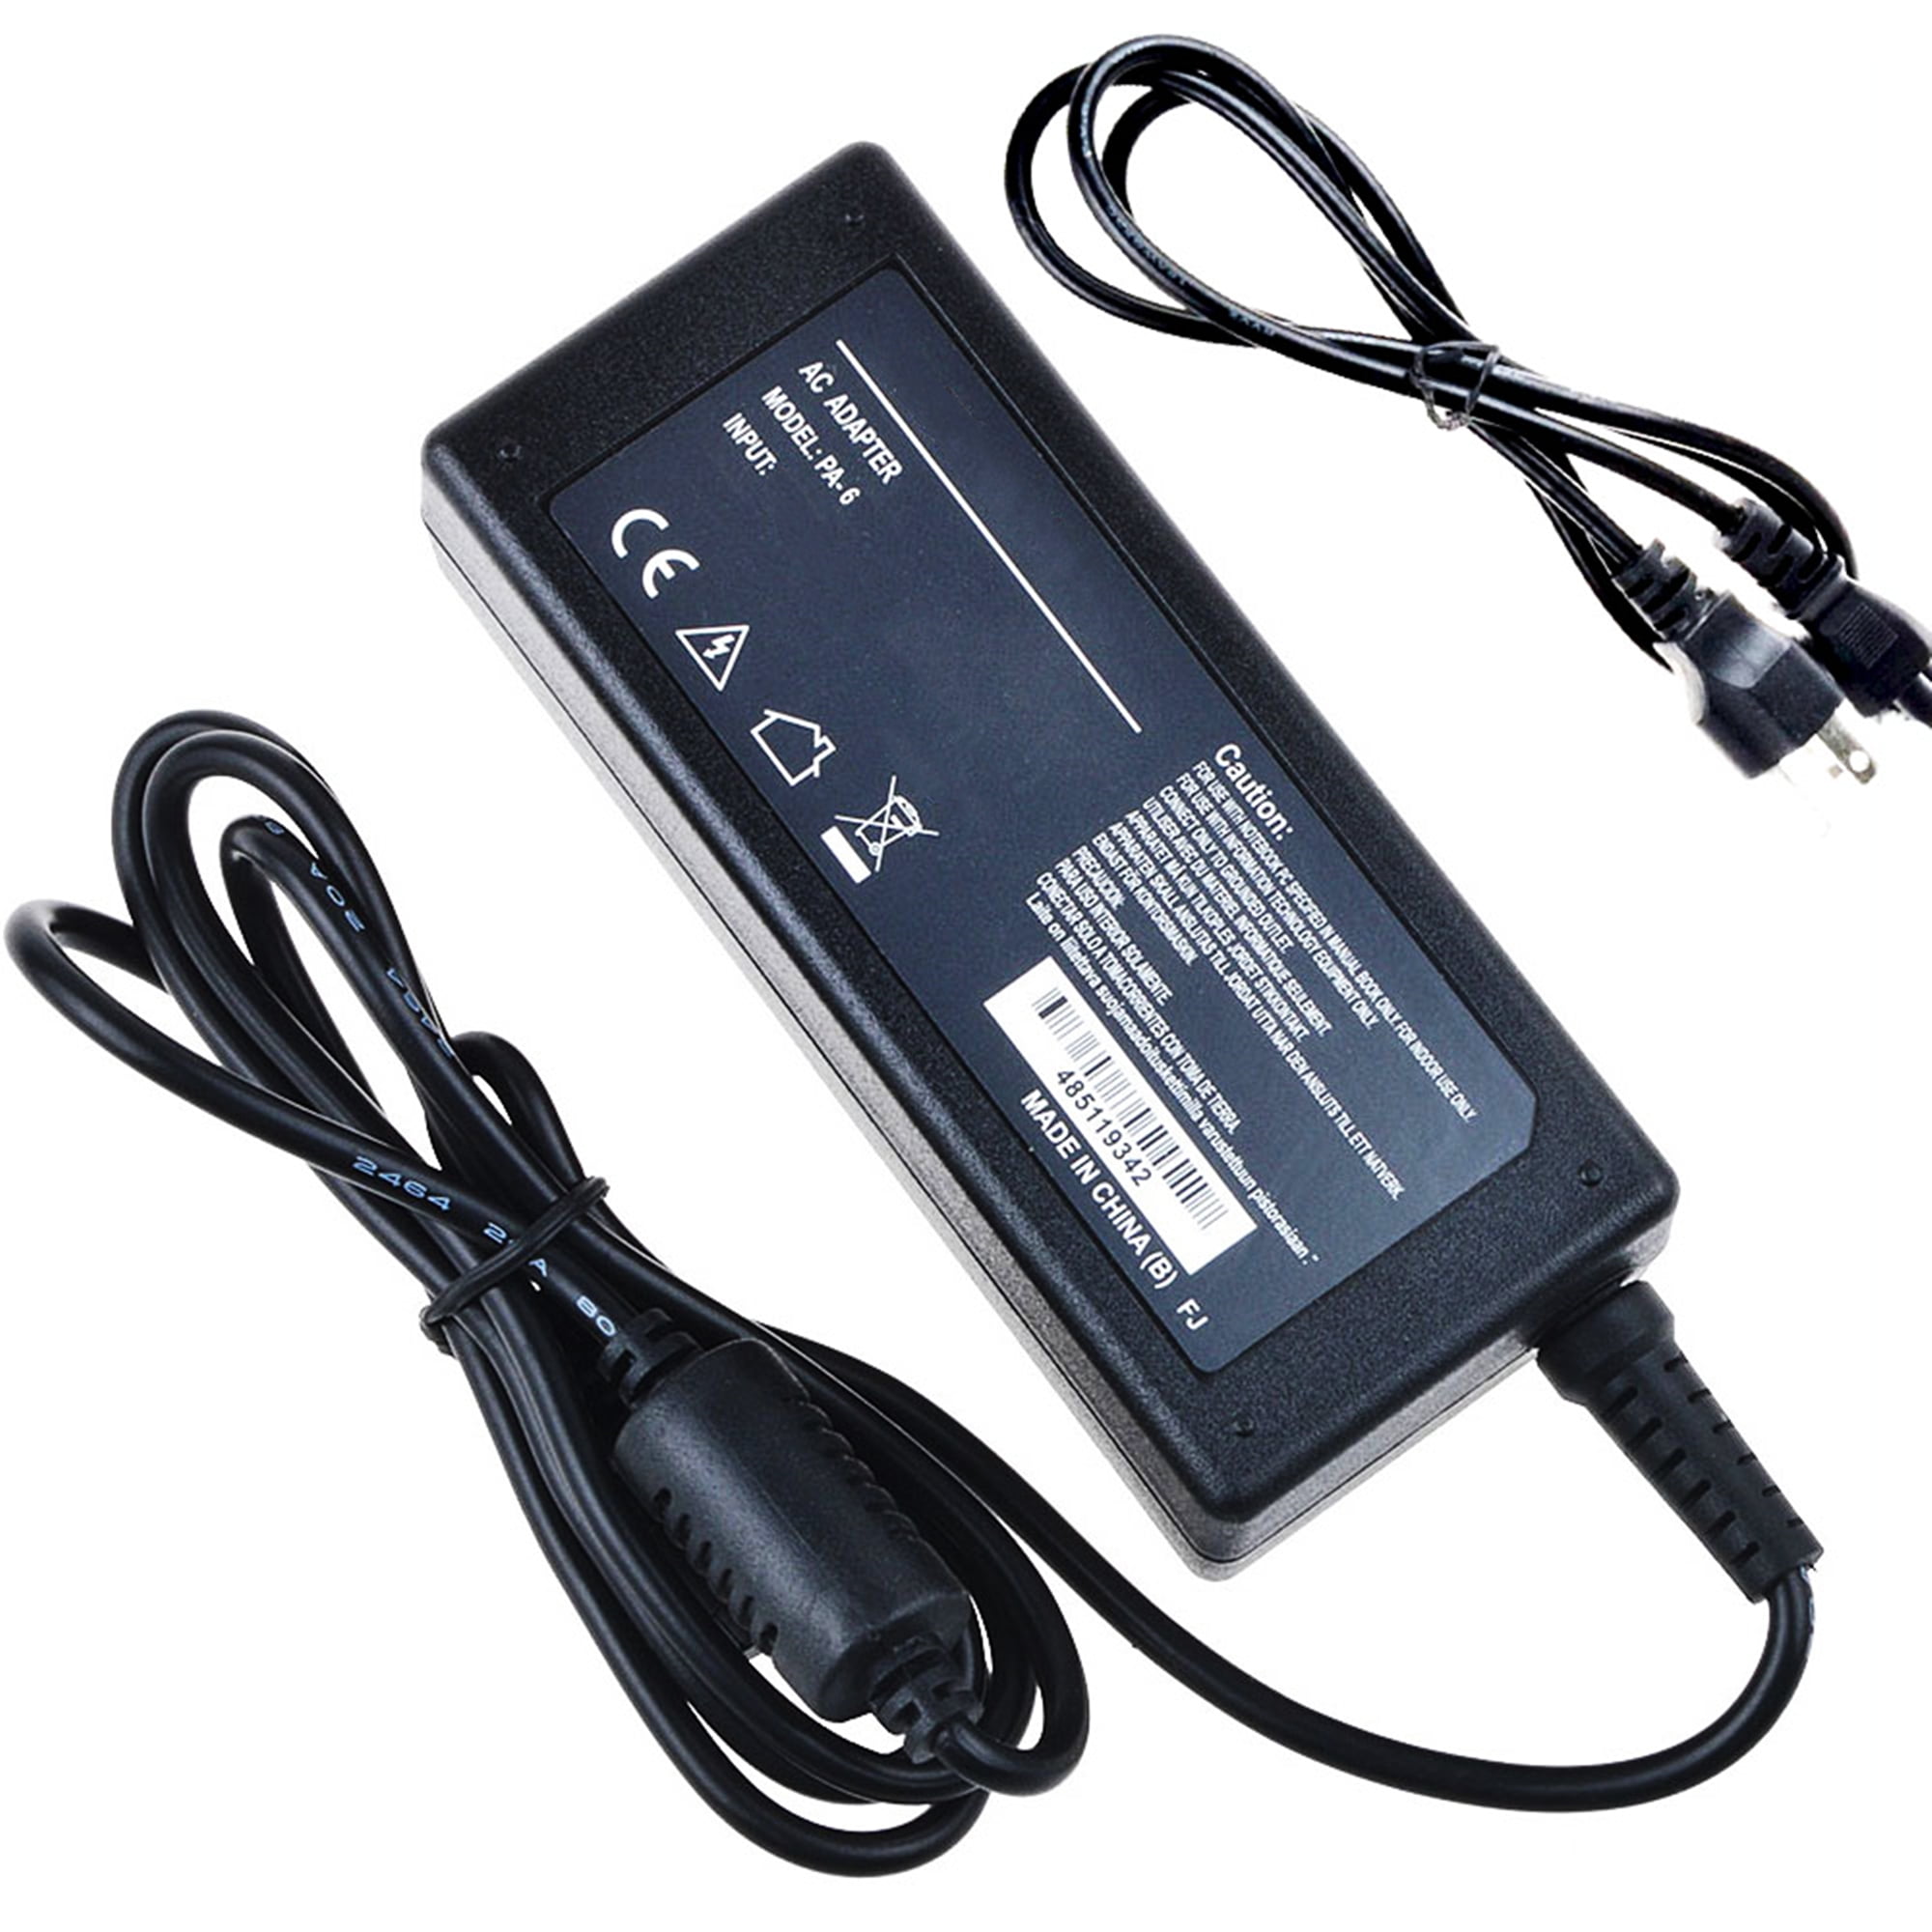 18VDC AC Adapter For HP PSC 760 750 950 950xi Printer Power Supply Cord Charger 